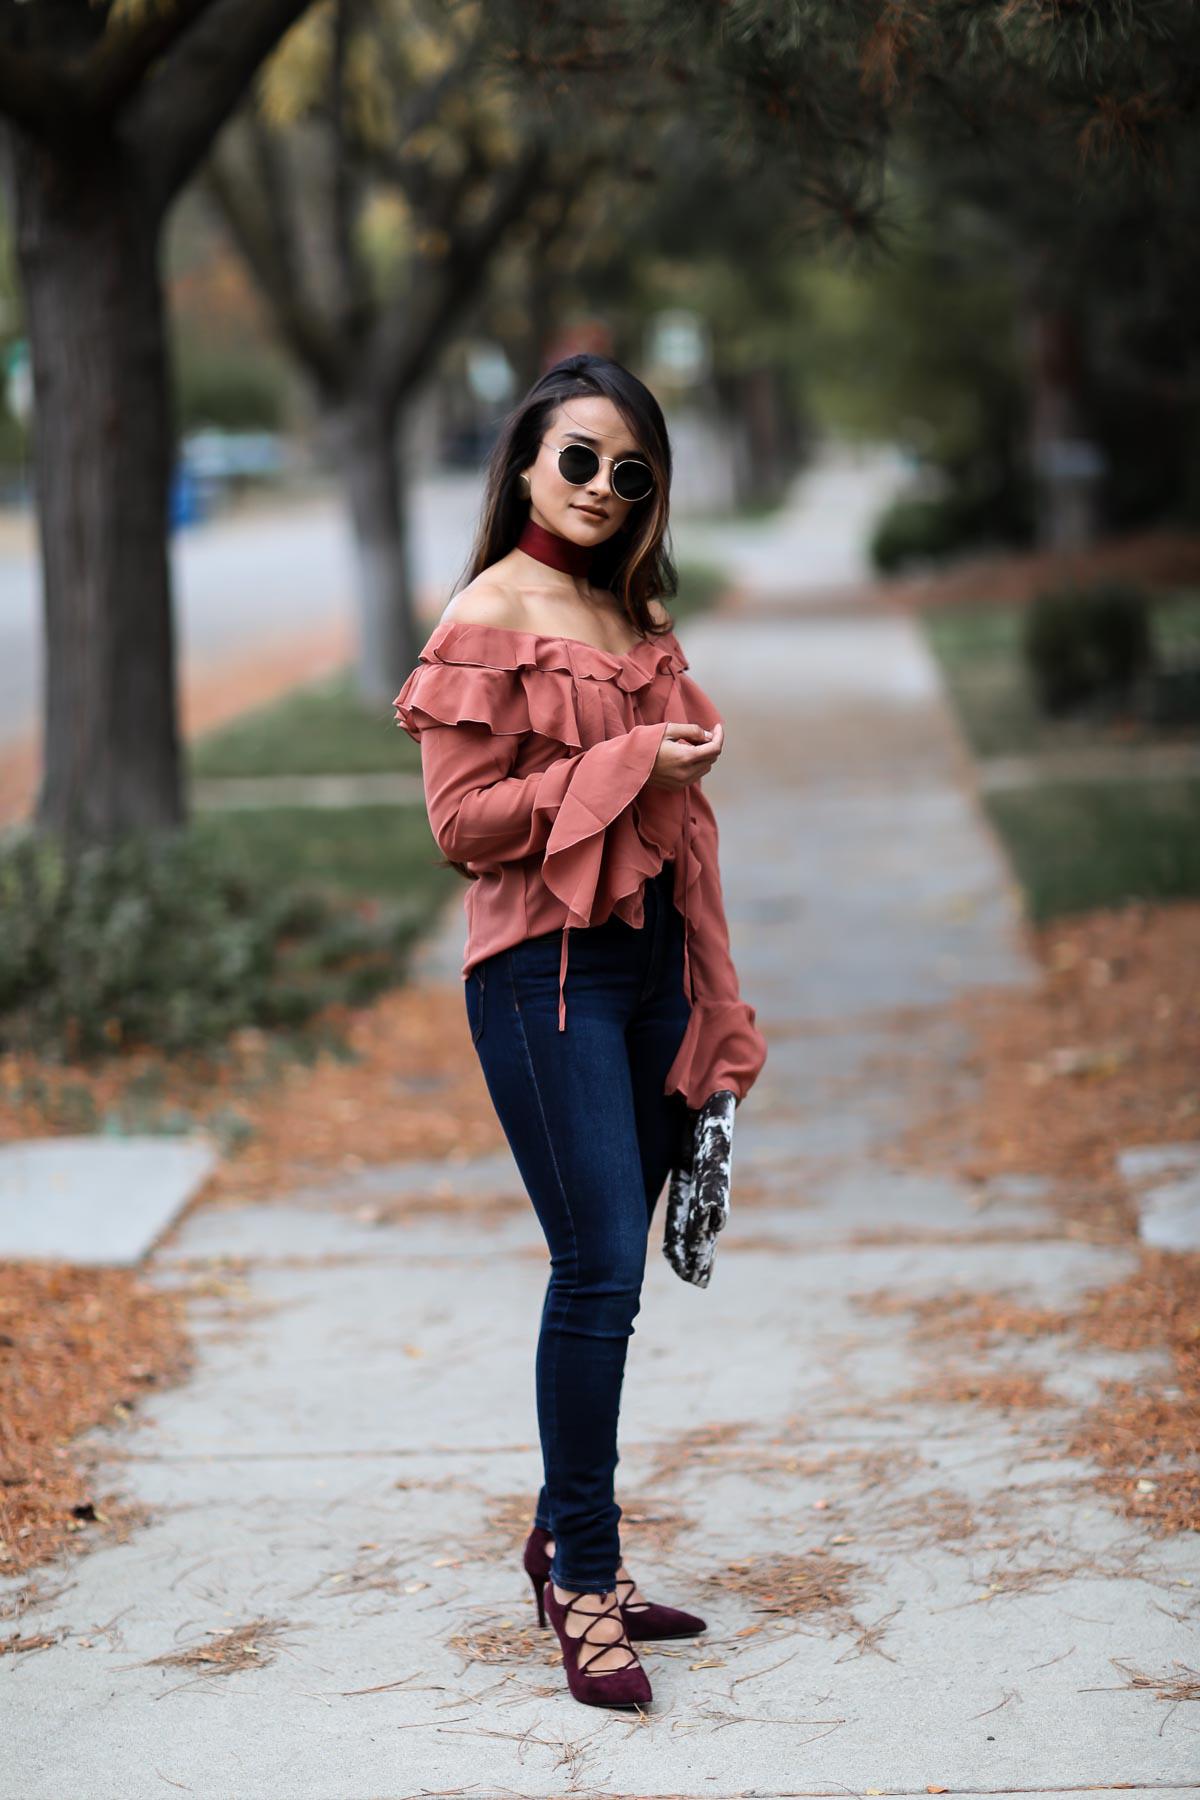 stiletto-confessions-forever21-ruffle-blouse-43